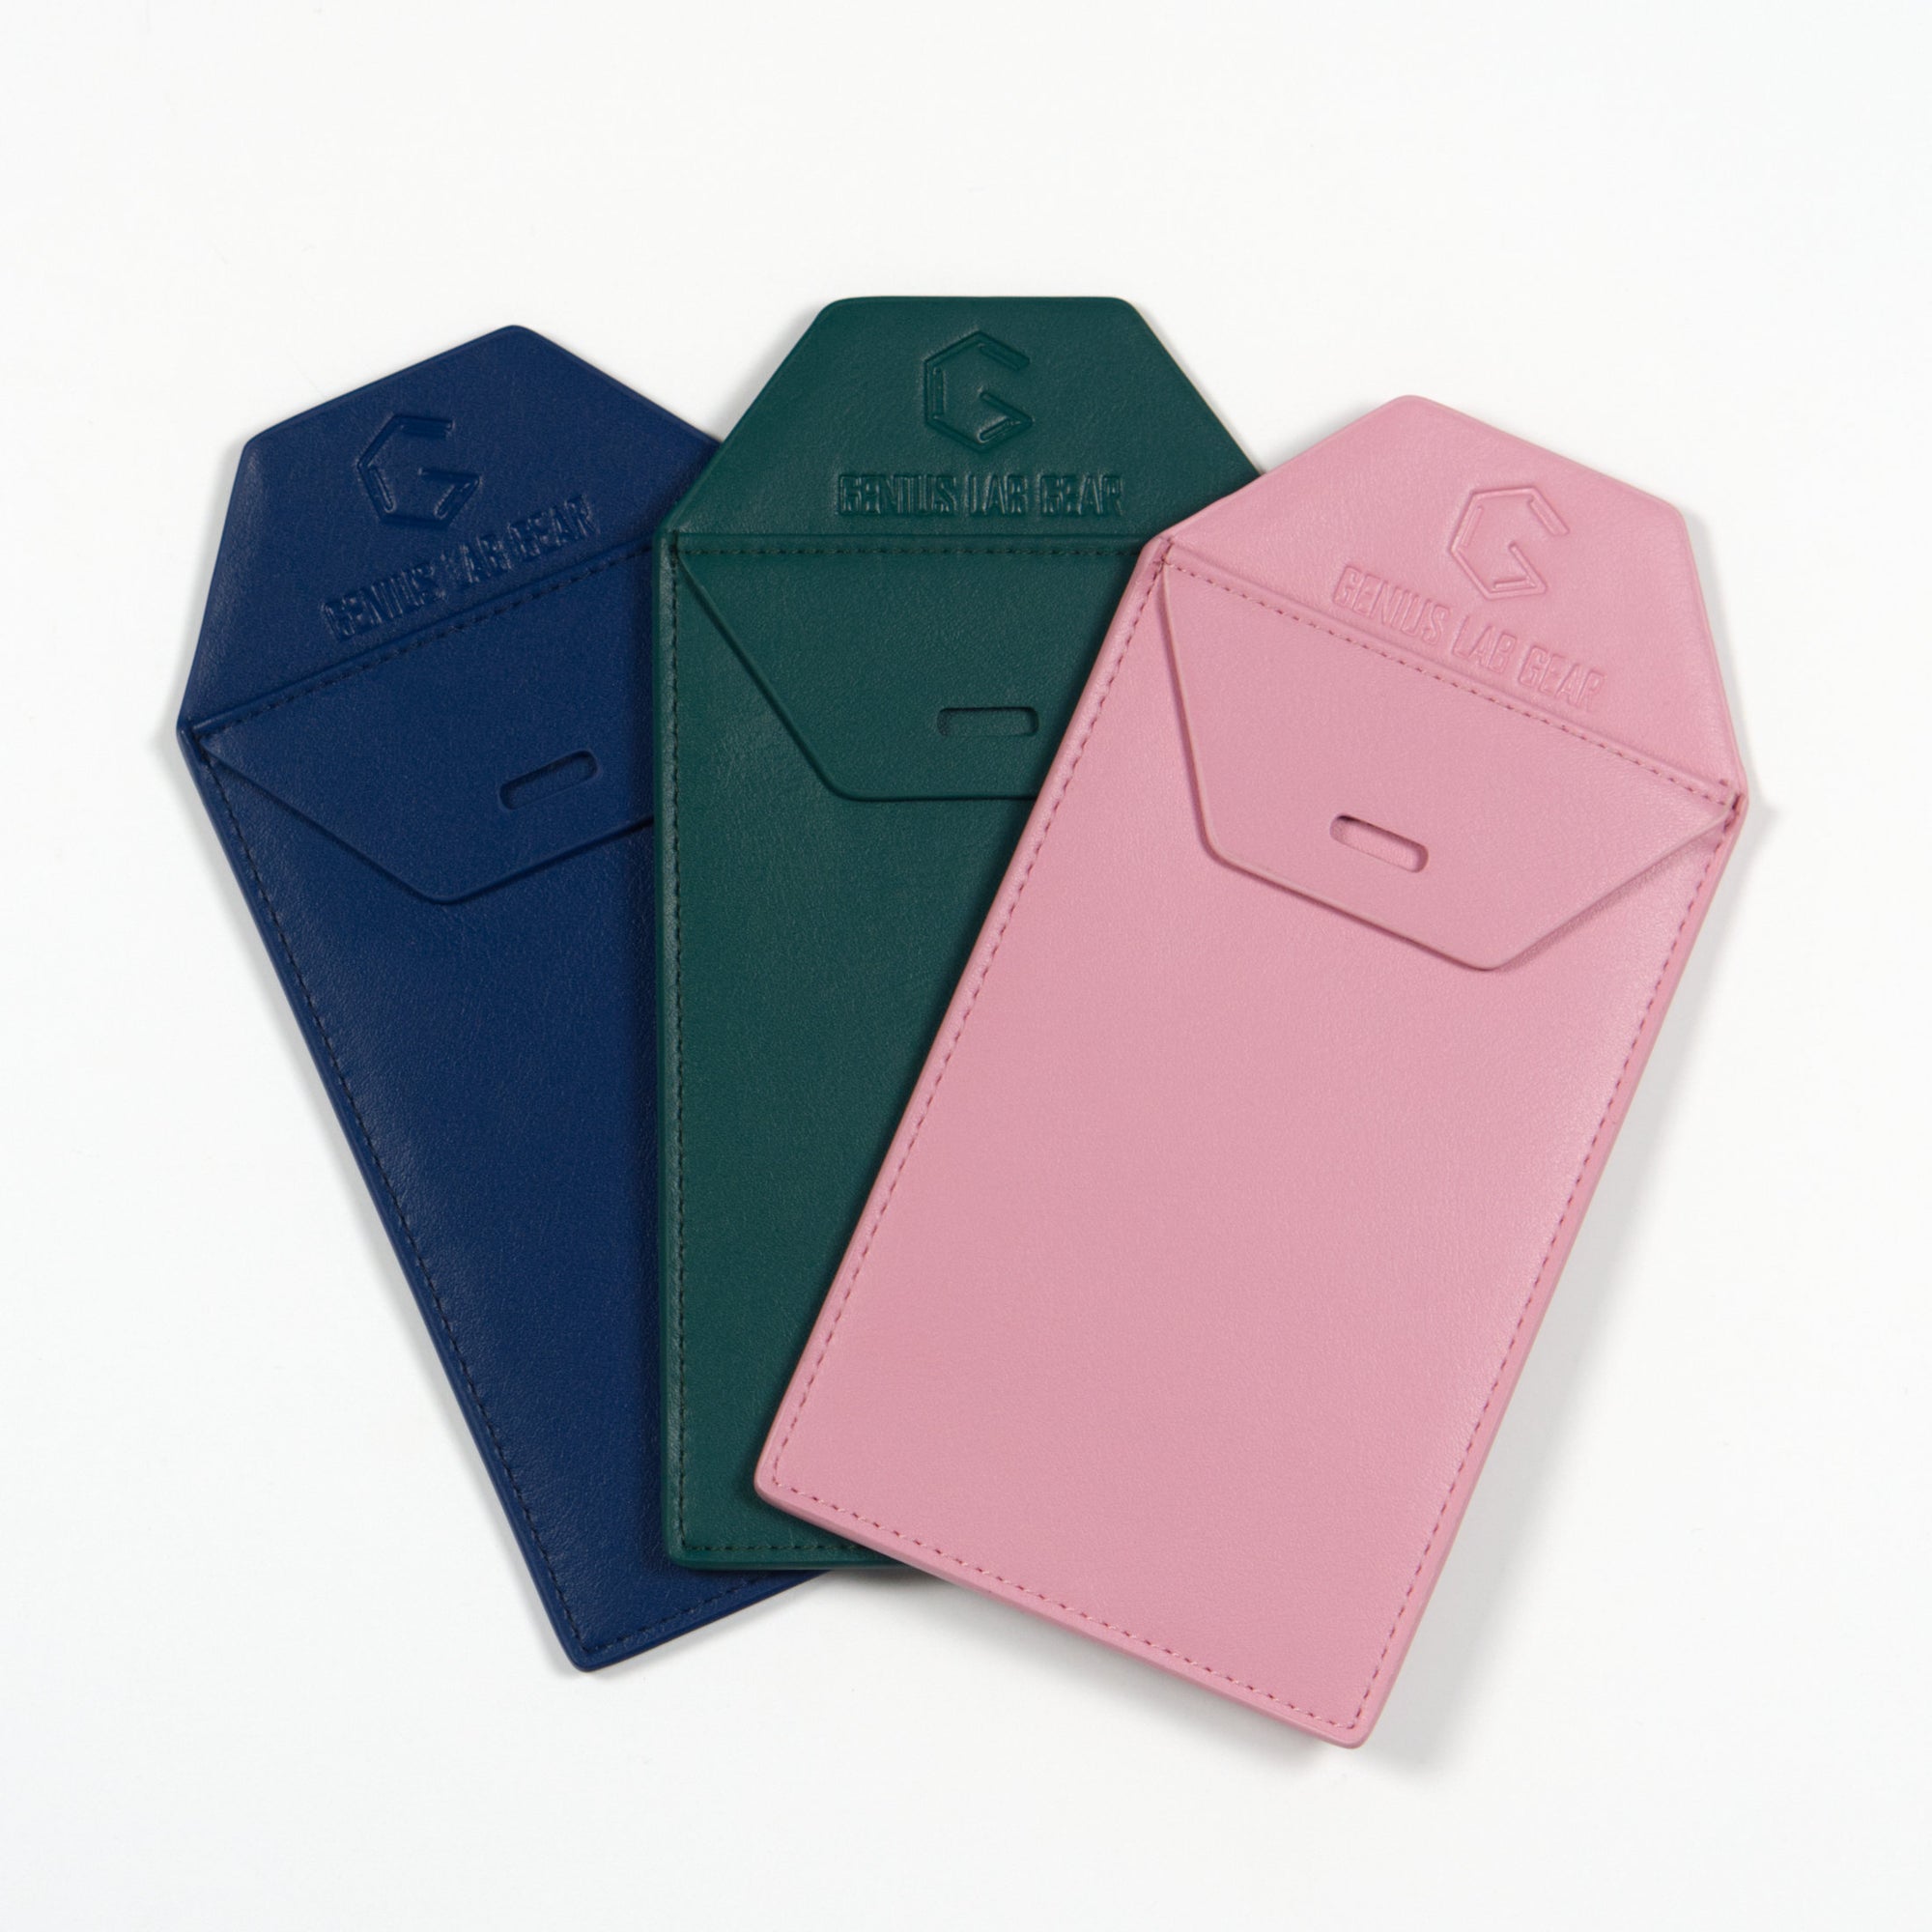 blue, green, and pink leather pocket protectors for scientists wearing lab coats